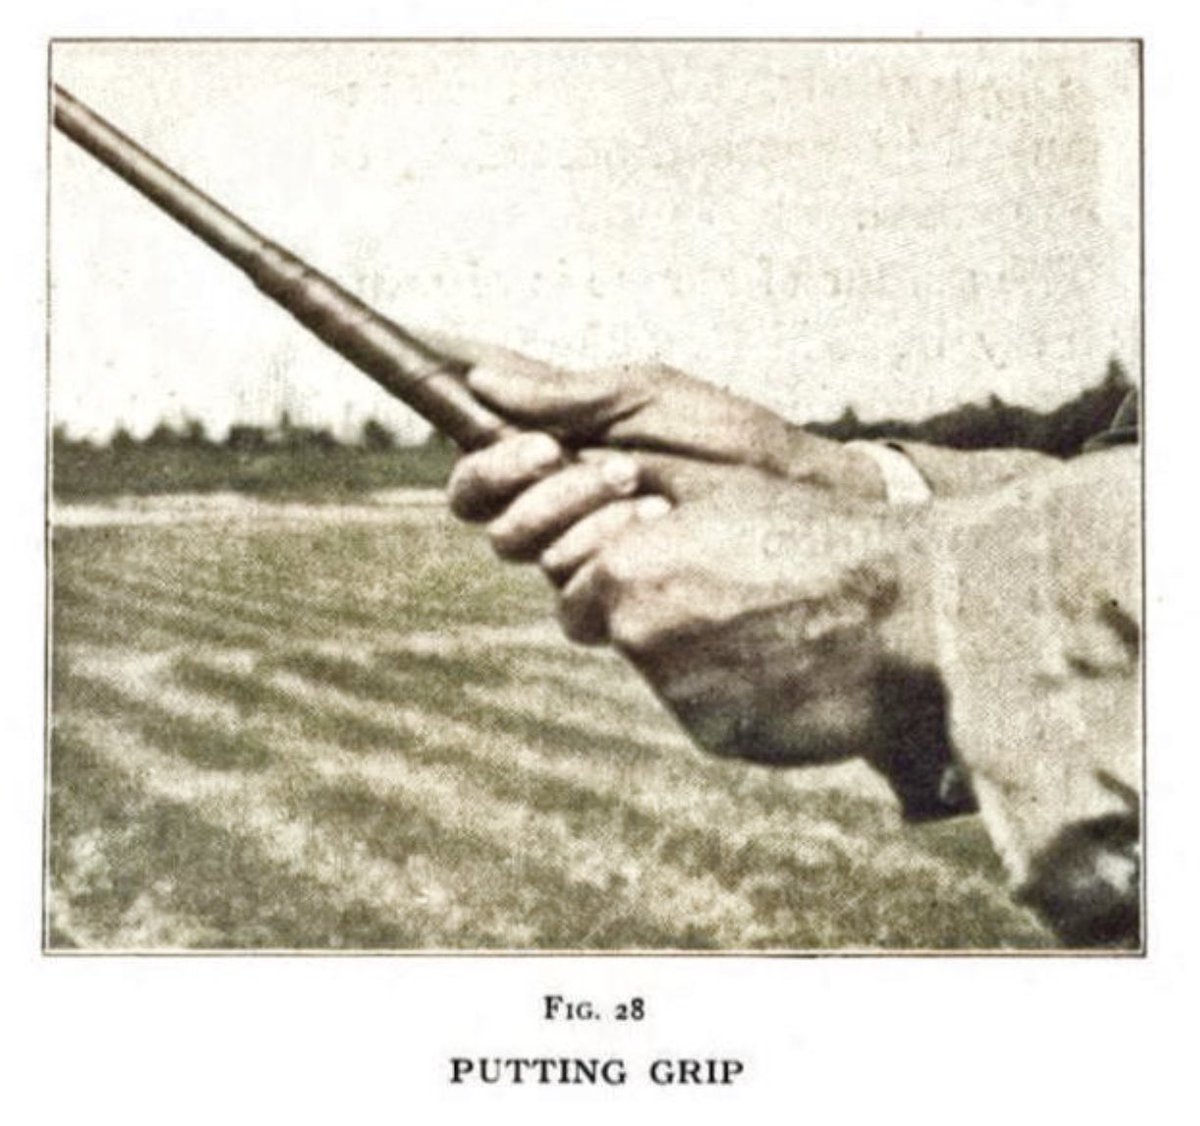 Walter Travis showing off his putting grip. Walter Travis easily could go down as one of the Top 5 to Top 10 putters of all-time. He famously gave Bobby Jones a lesson that made Jones one of the best putters of all-time.  @USGA  #BobbyJones